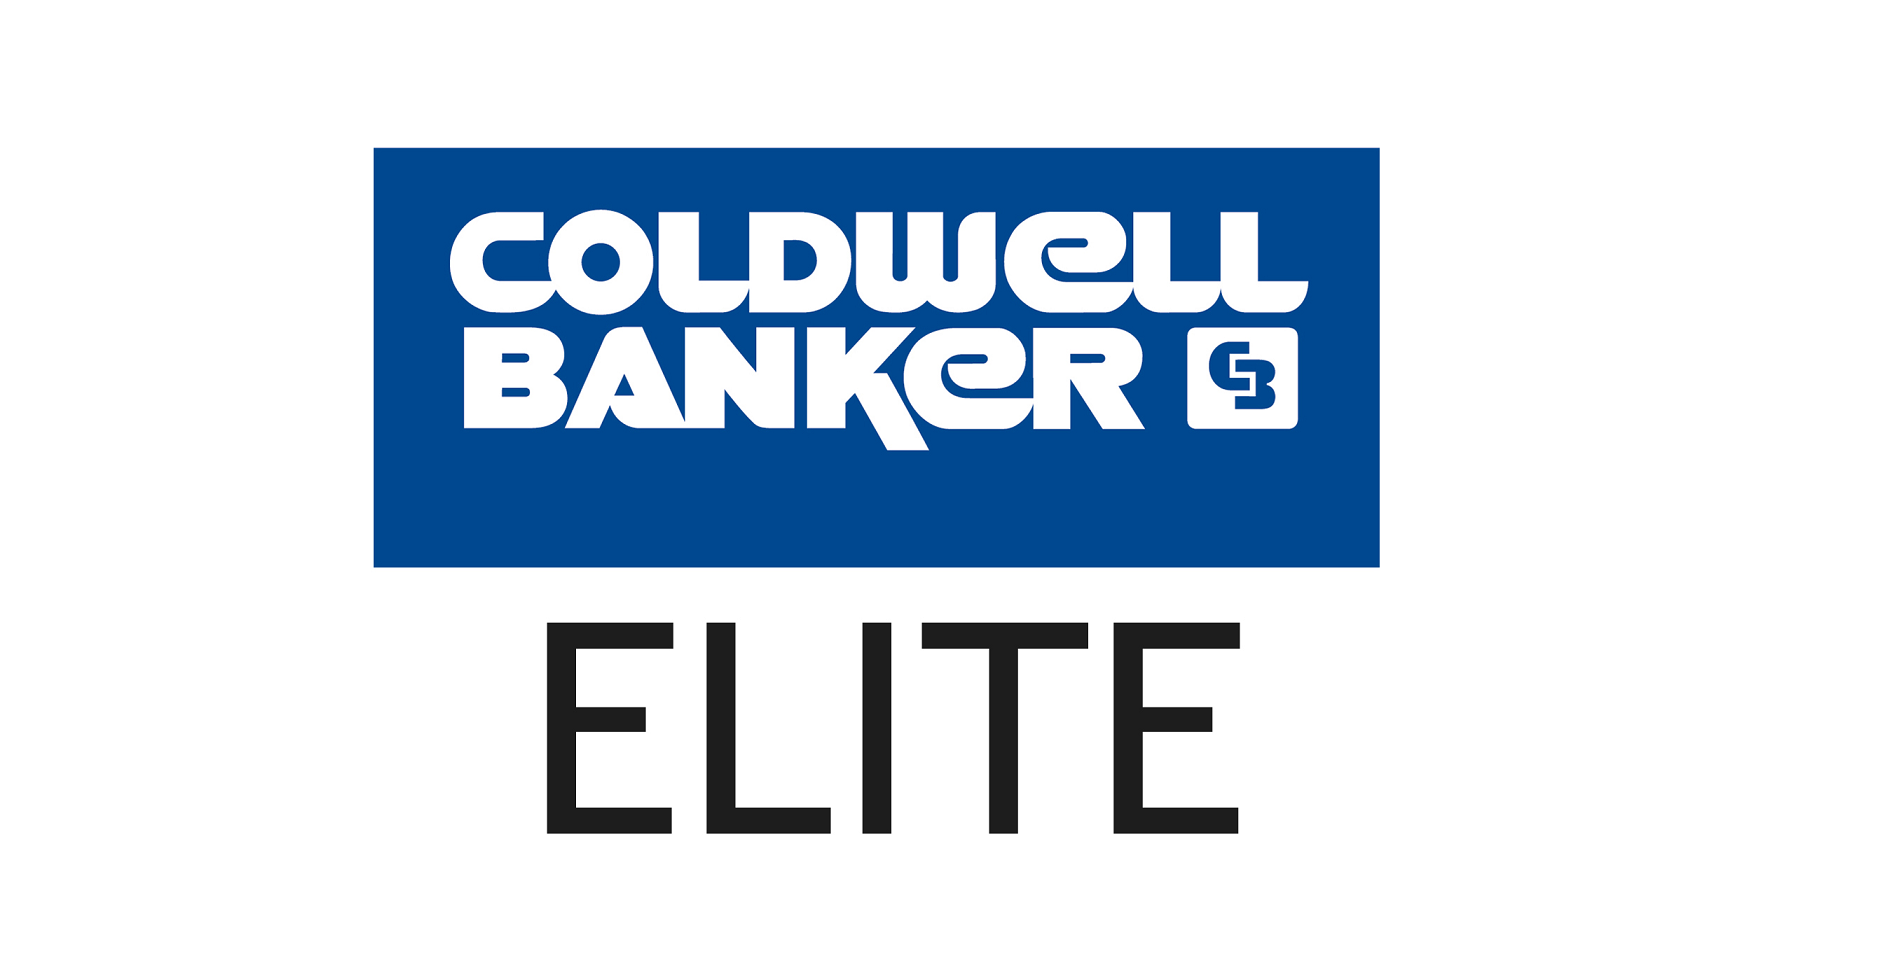 Eric Nelson of Coldwell Banker Elite